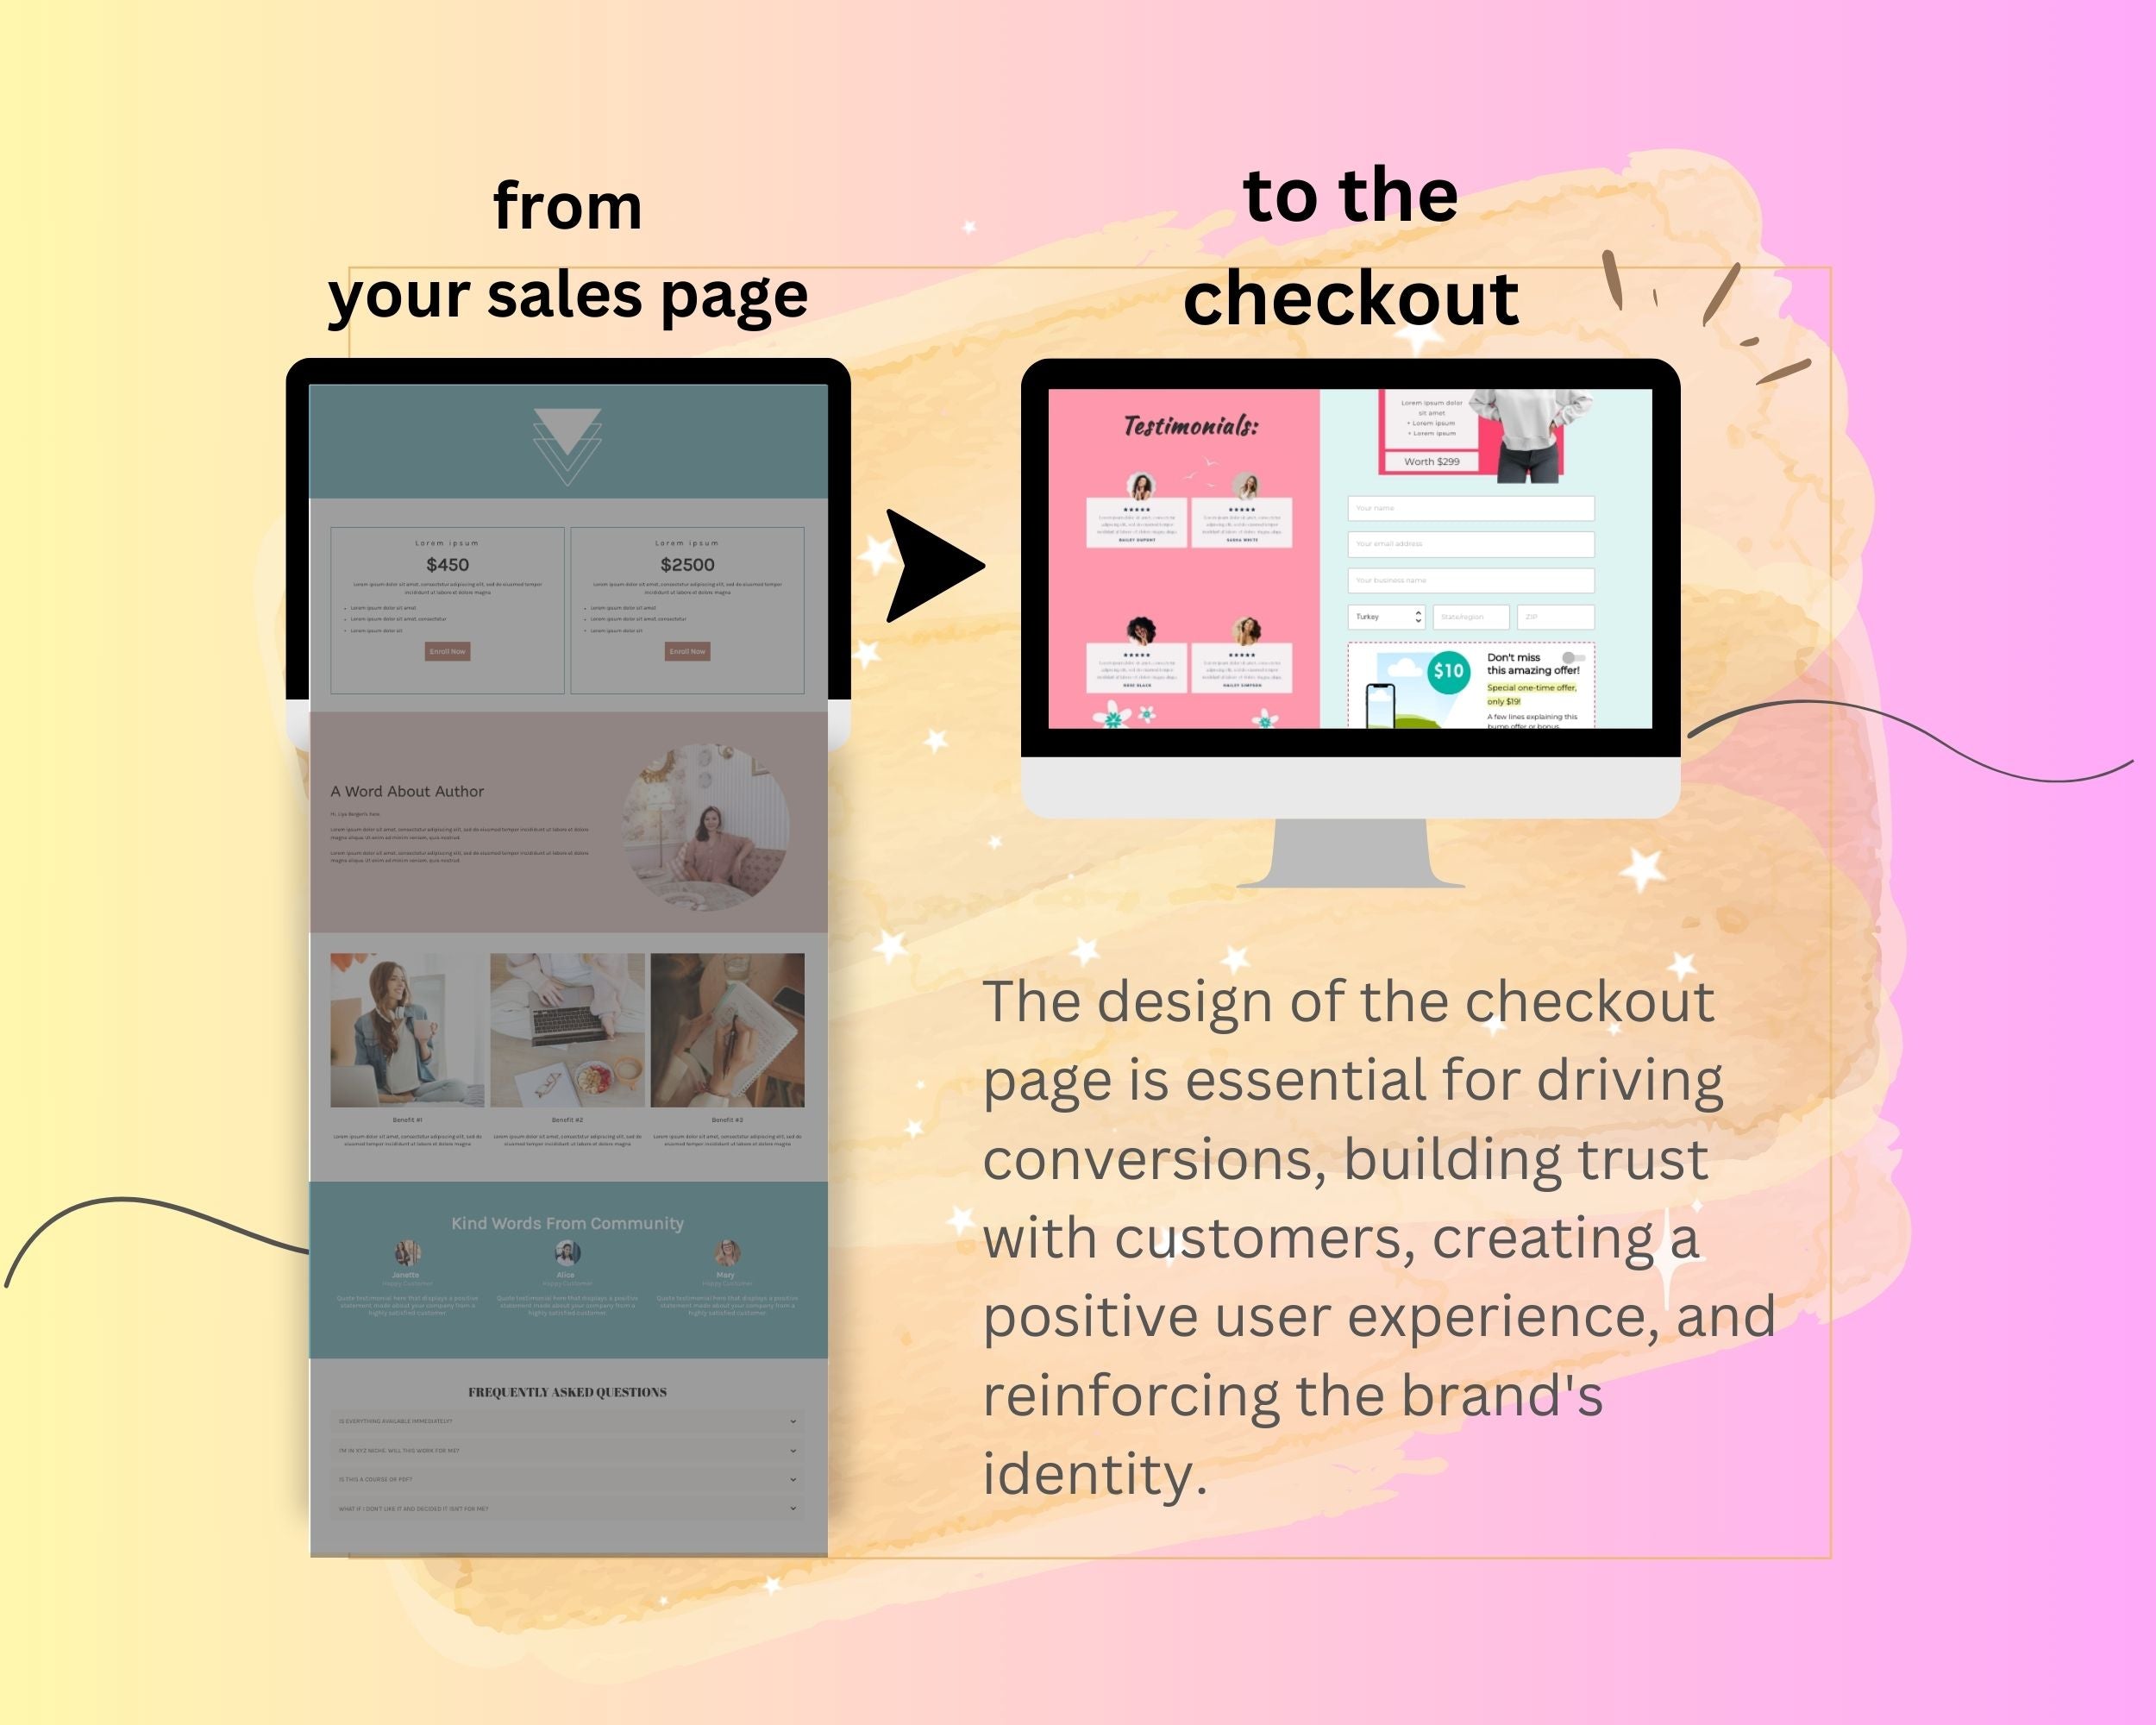 Colorful ThriveCart Checkout Template